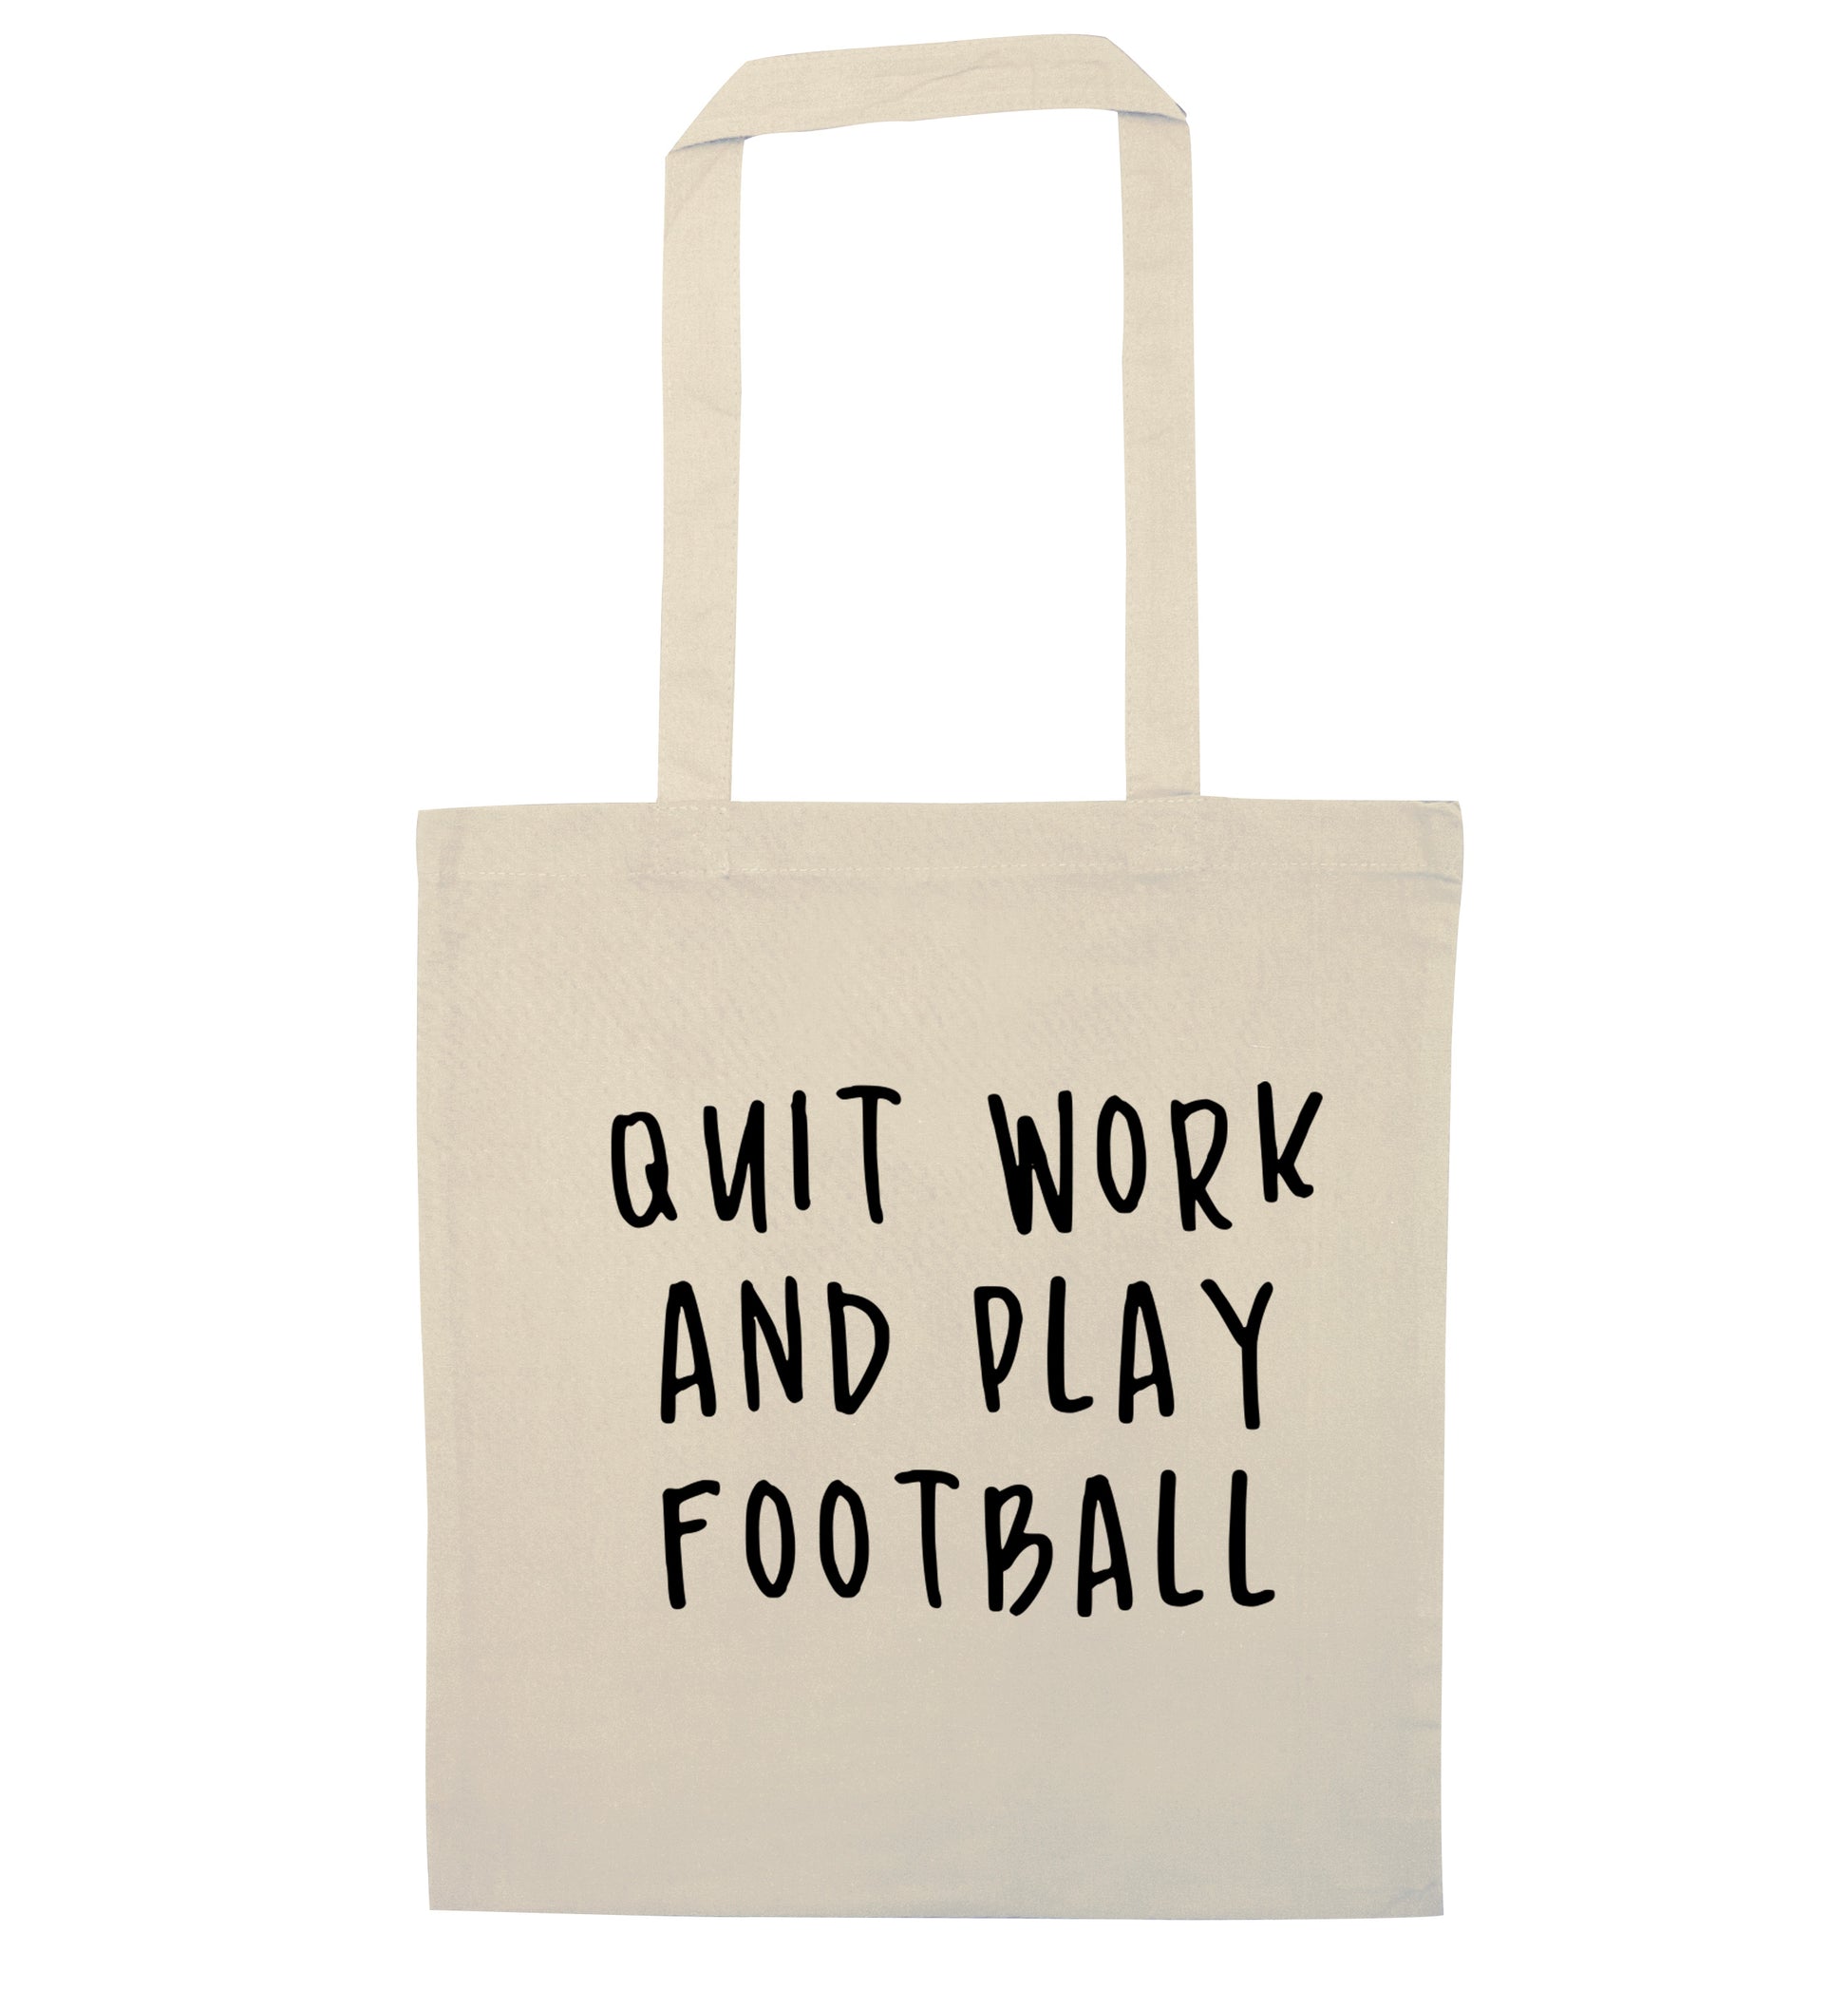 Quit work play football natural tote bag